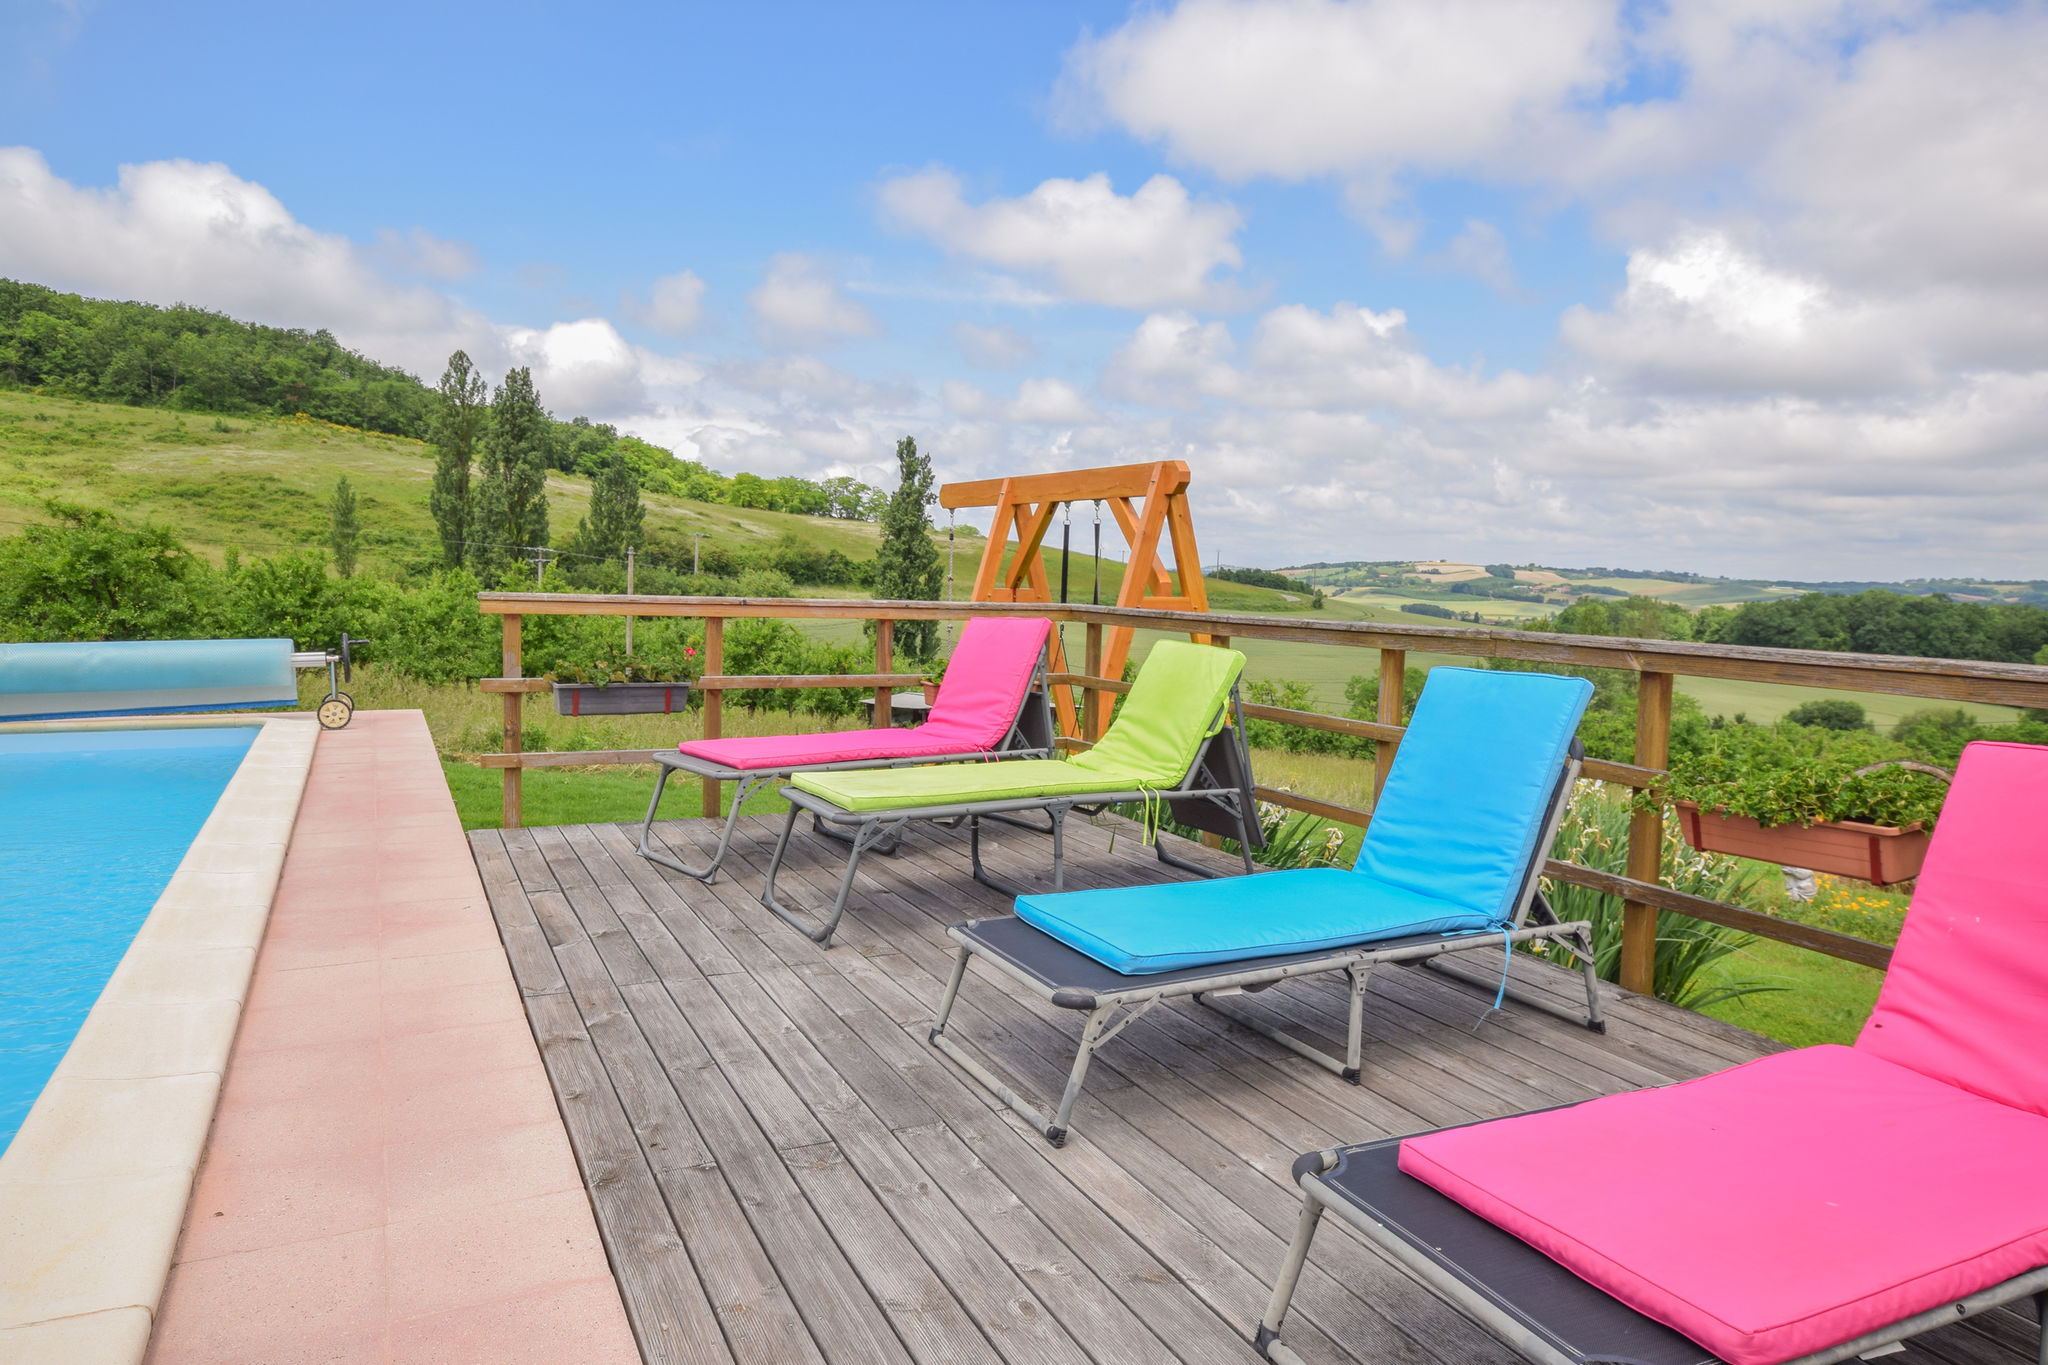 Spacious villa with large terraces and private pool, set in rural surroundings.